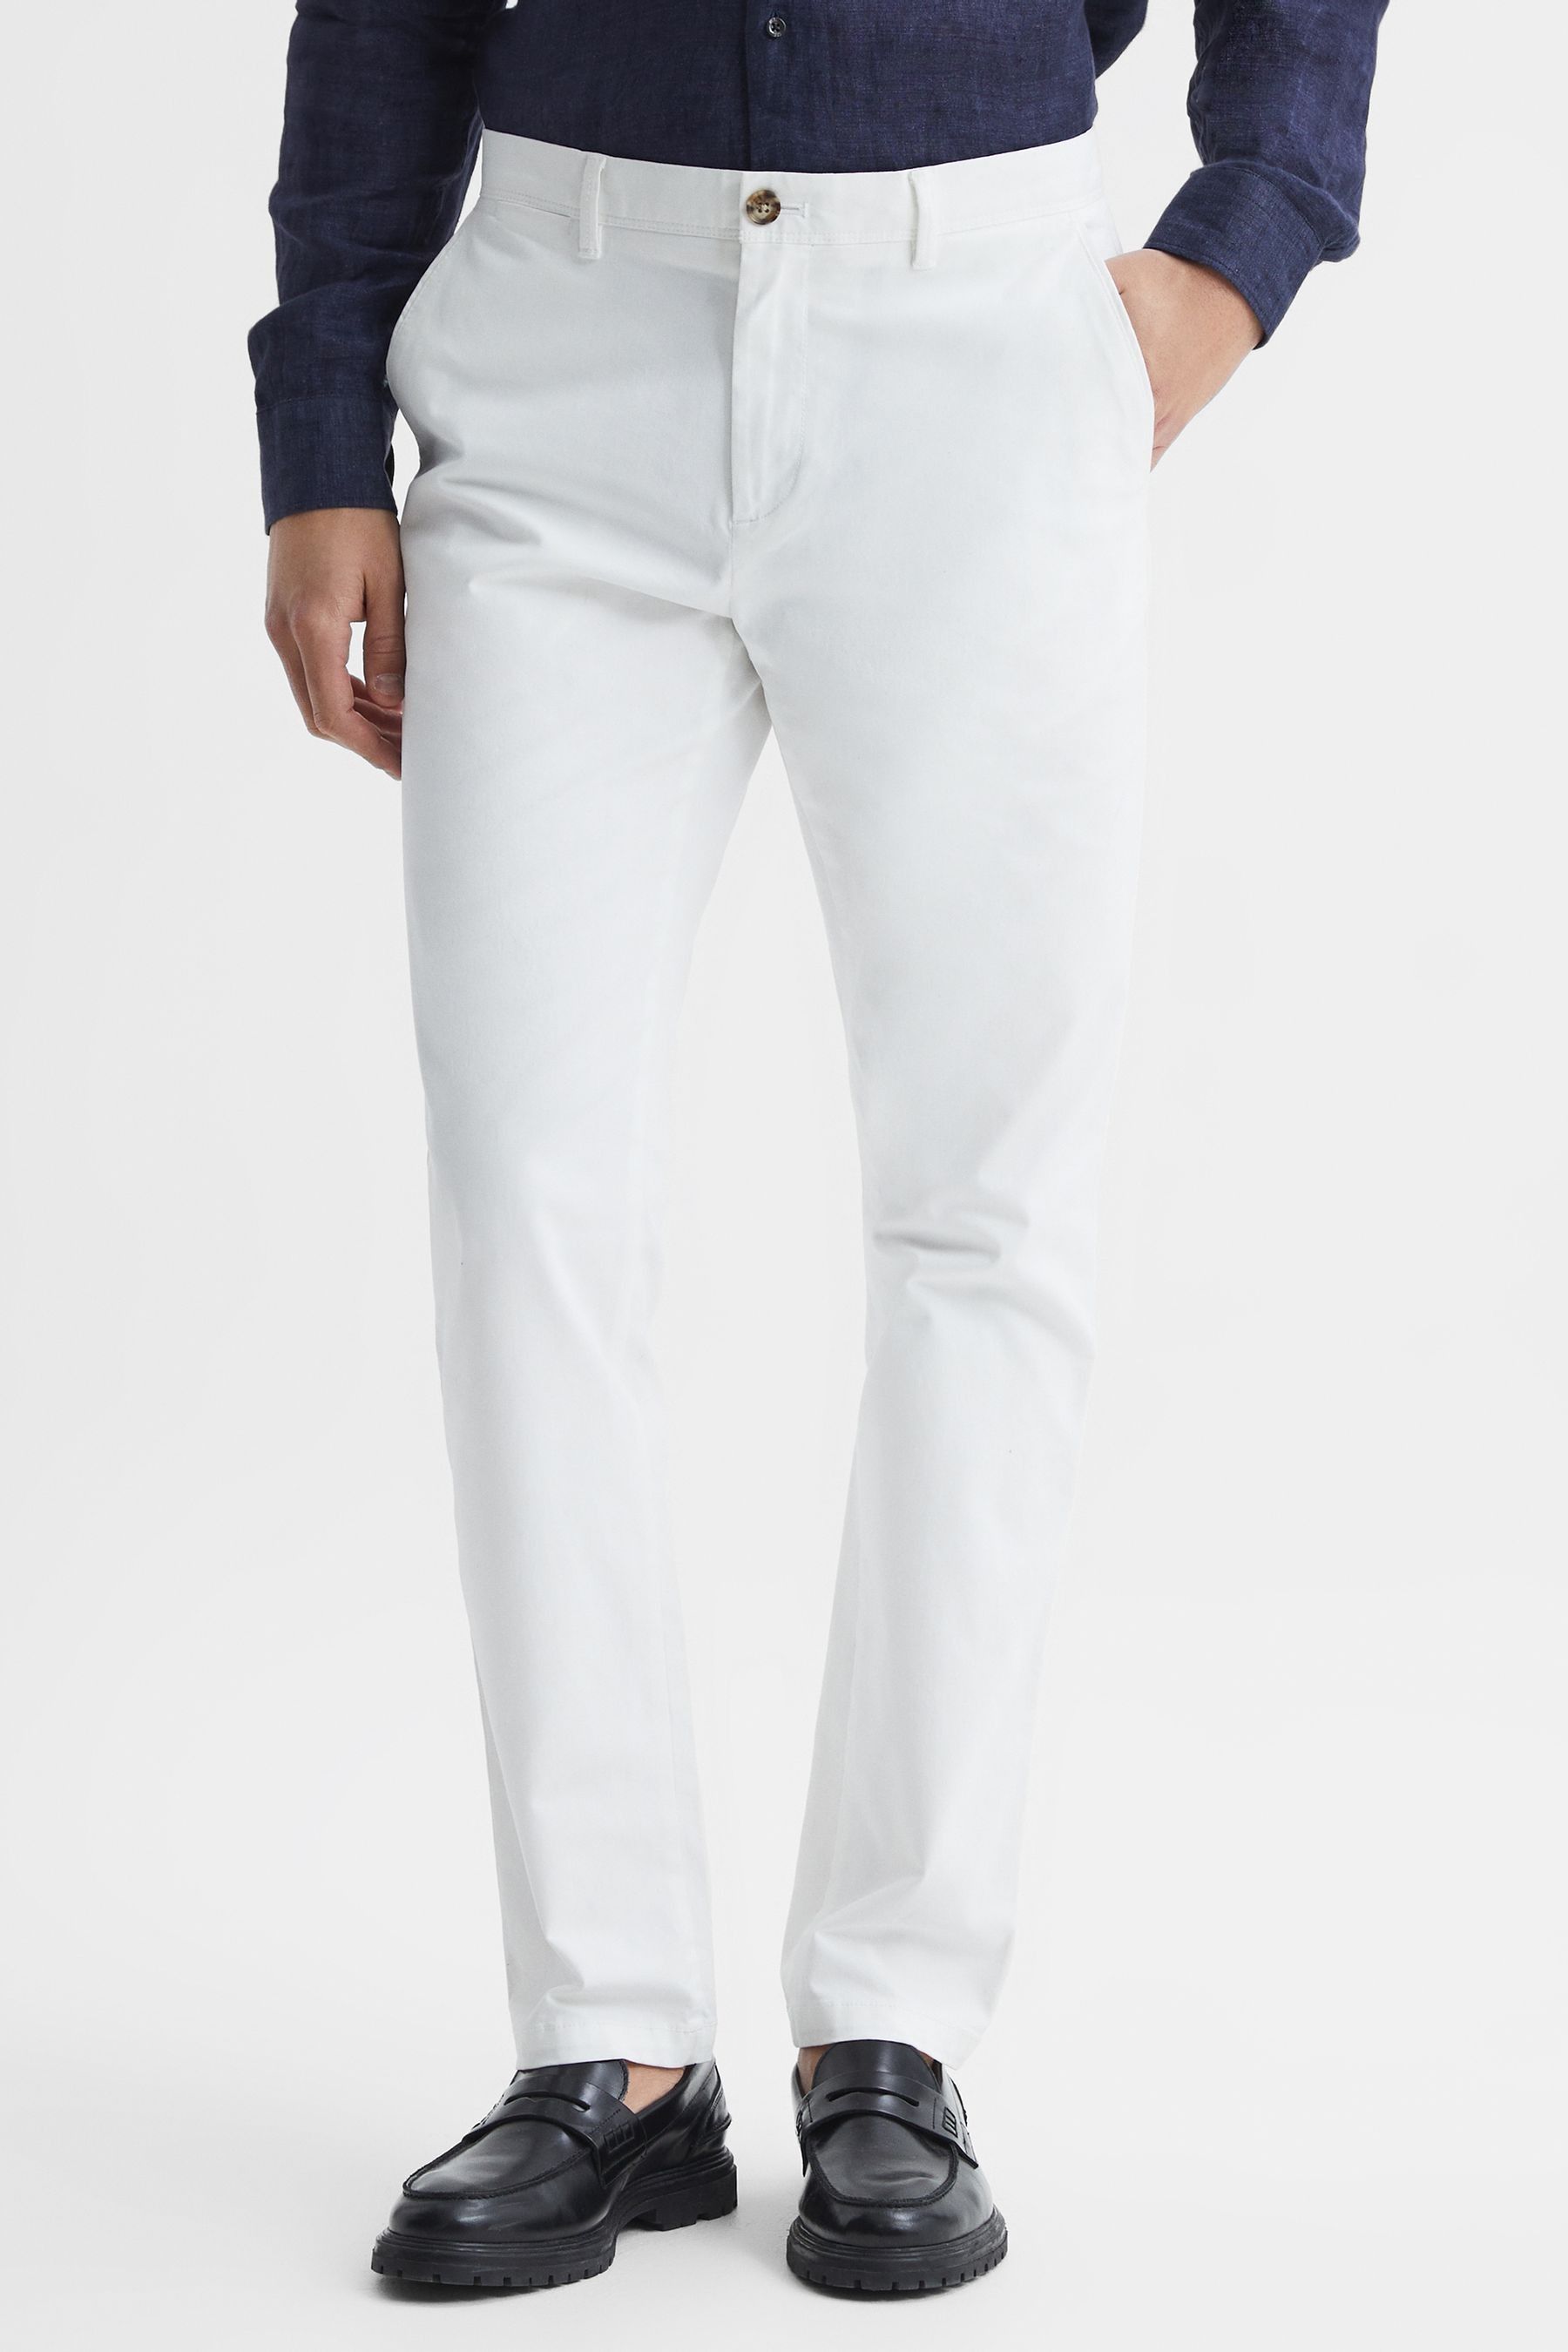 Shop Reiss Pitch - White Slim Fit Washed Cotton Blend Chinos, 34